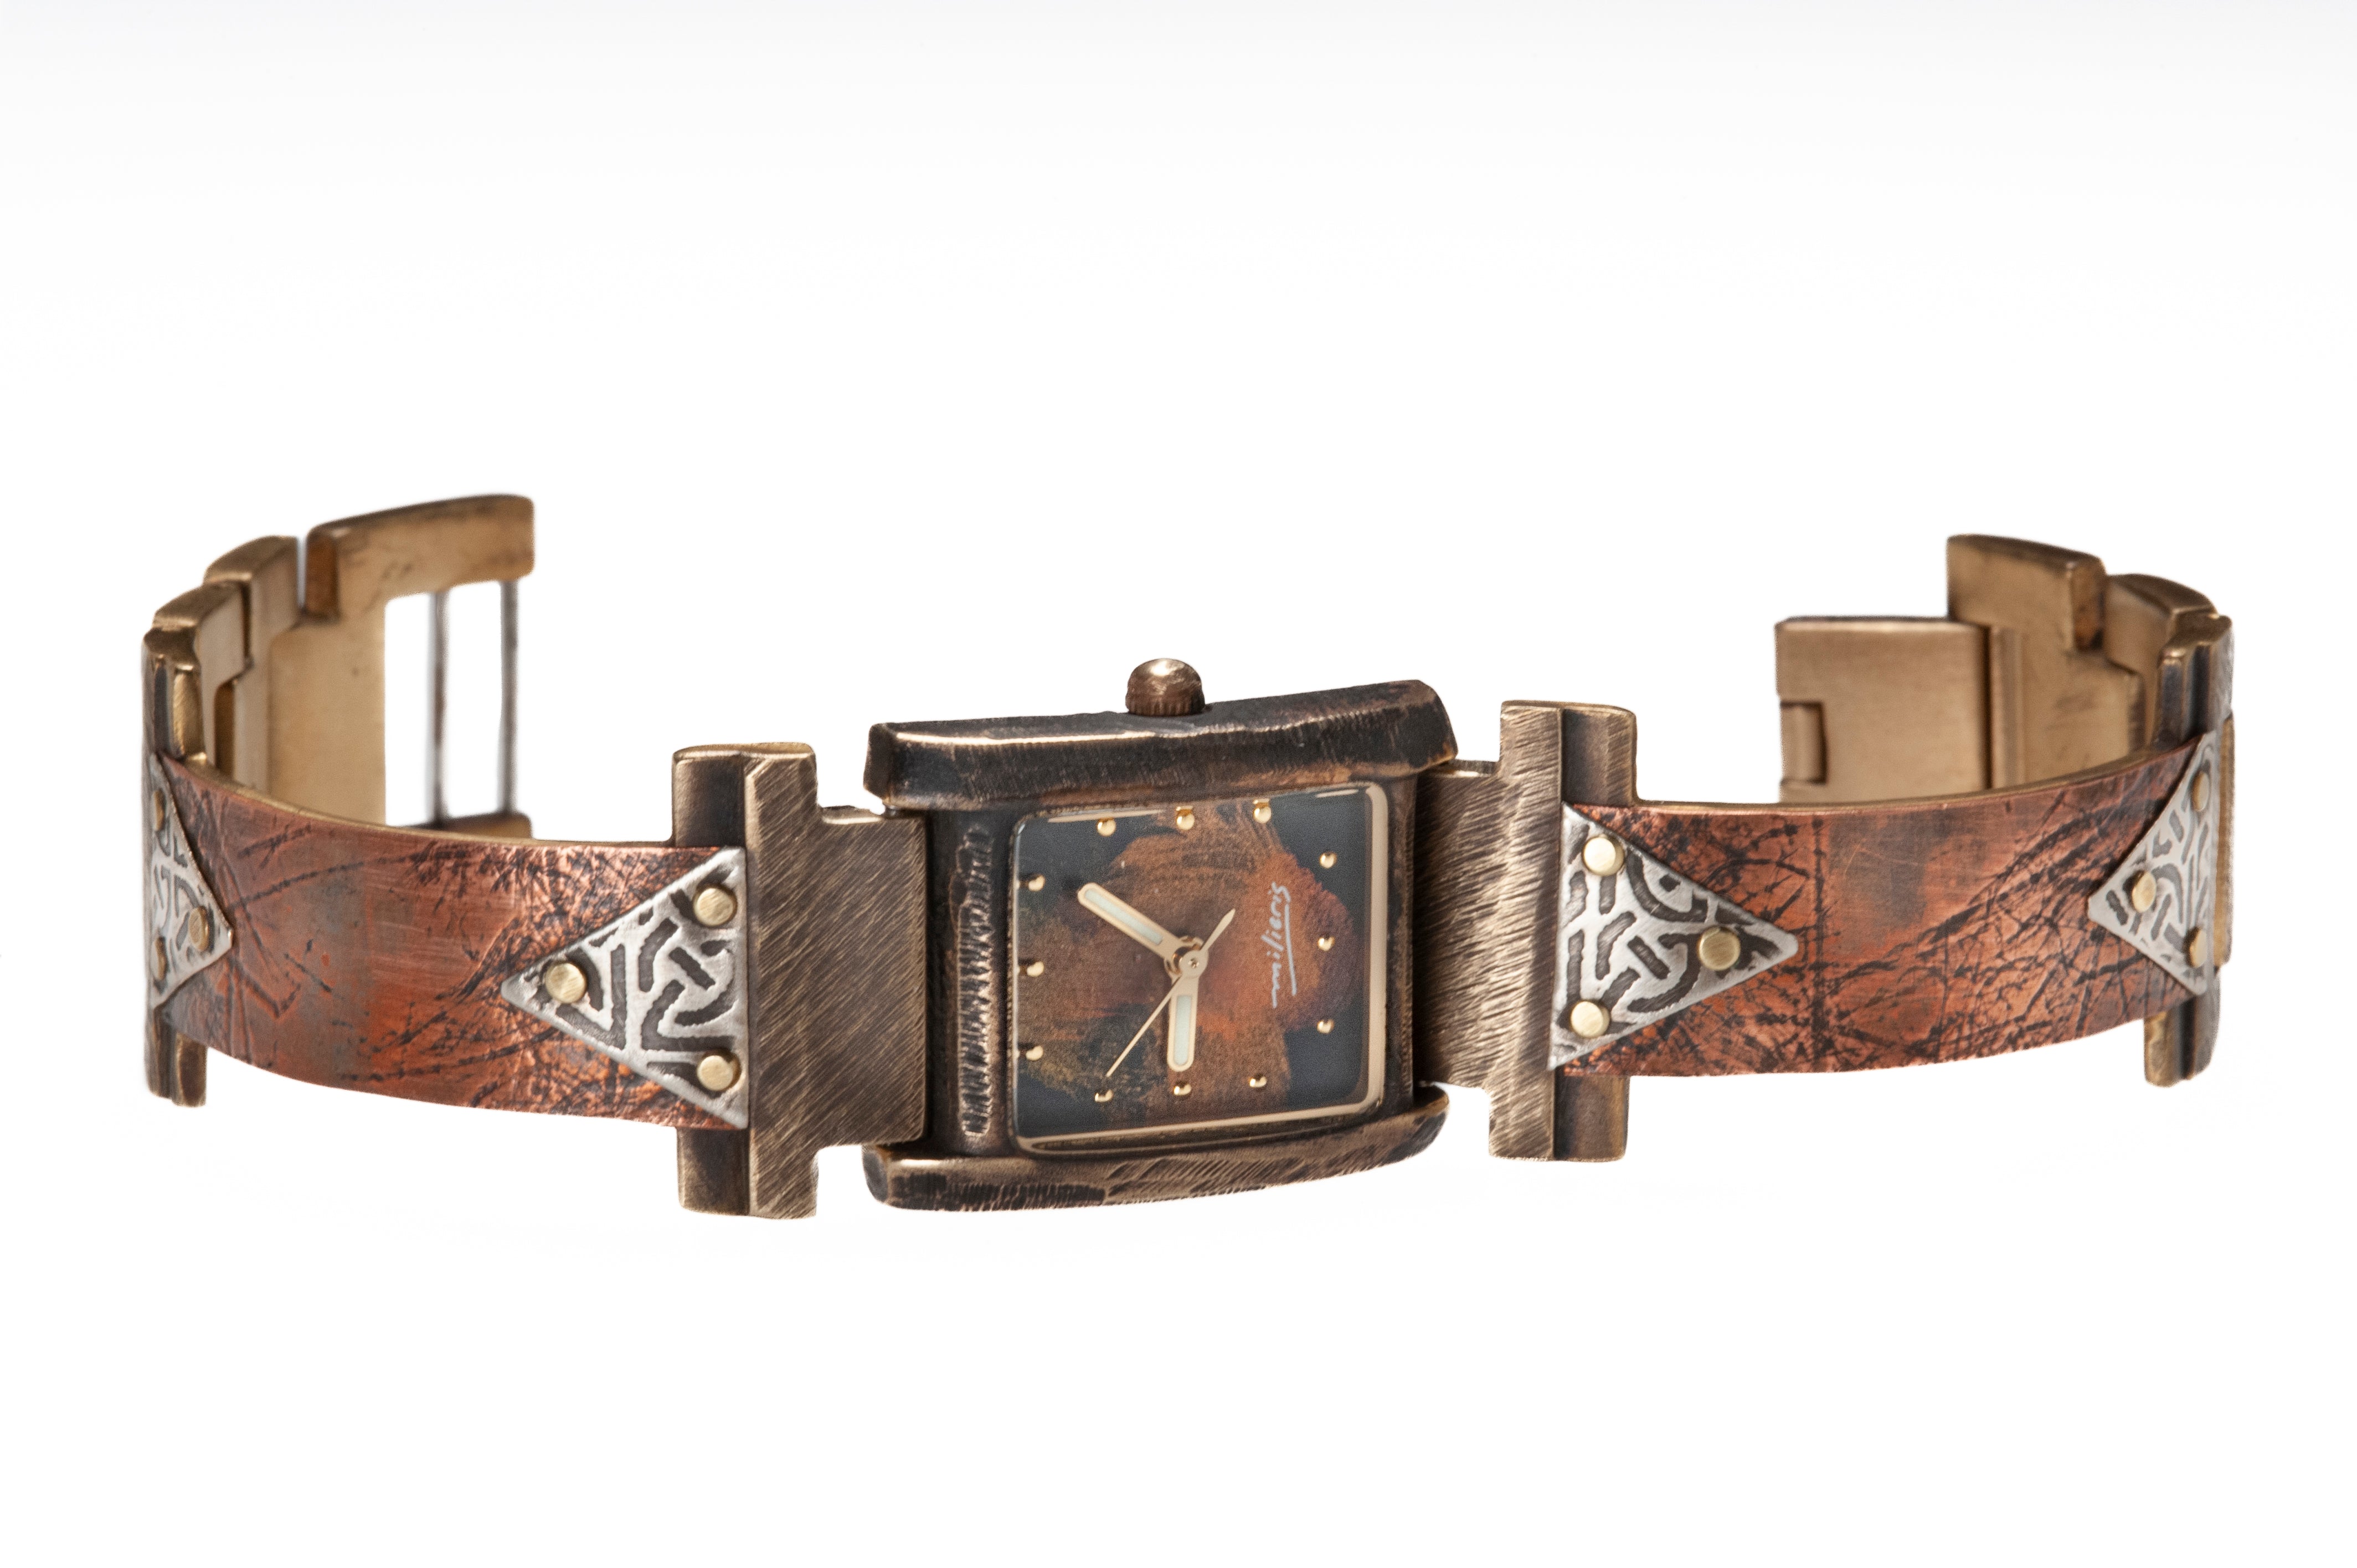 The Ponte Vecchio watch in copper and silver, facing front. Note the domed glass that marks the FLORENCE collection. The silver triangles are embossed with Celtic designs while the copper watch band bears the patterns of handmade coconut paper pressed onto the metal.